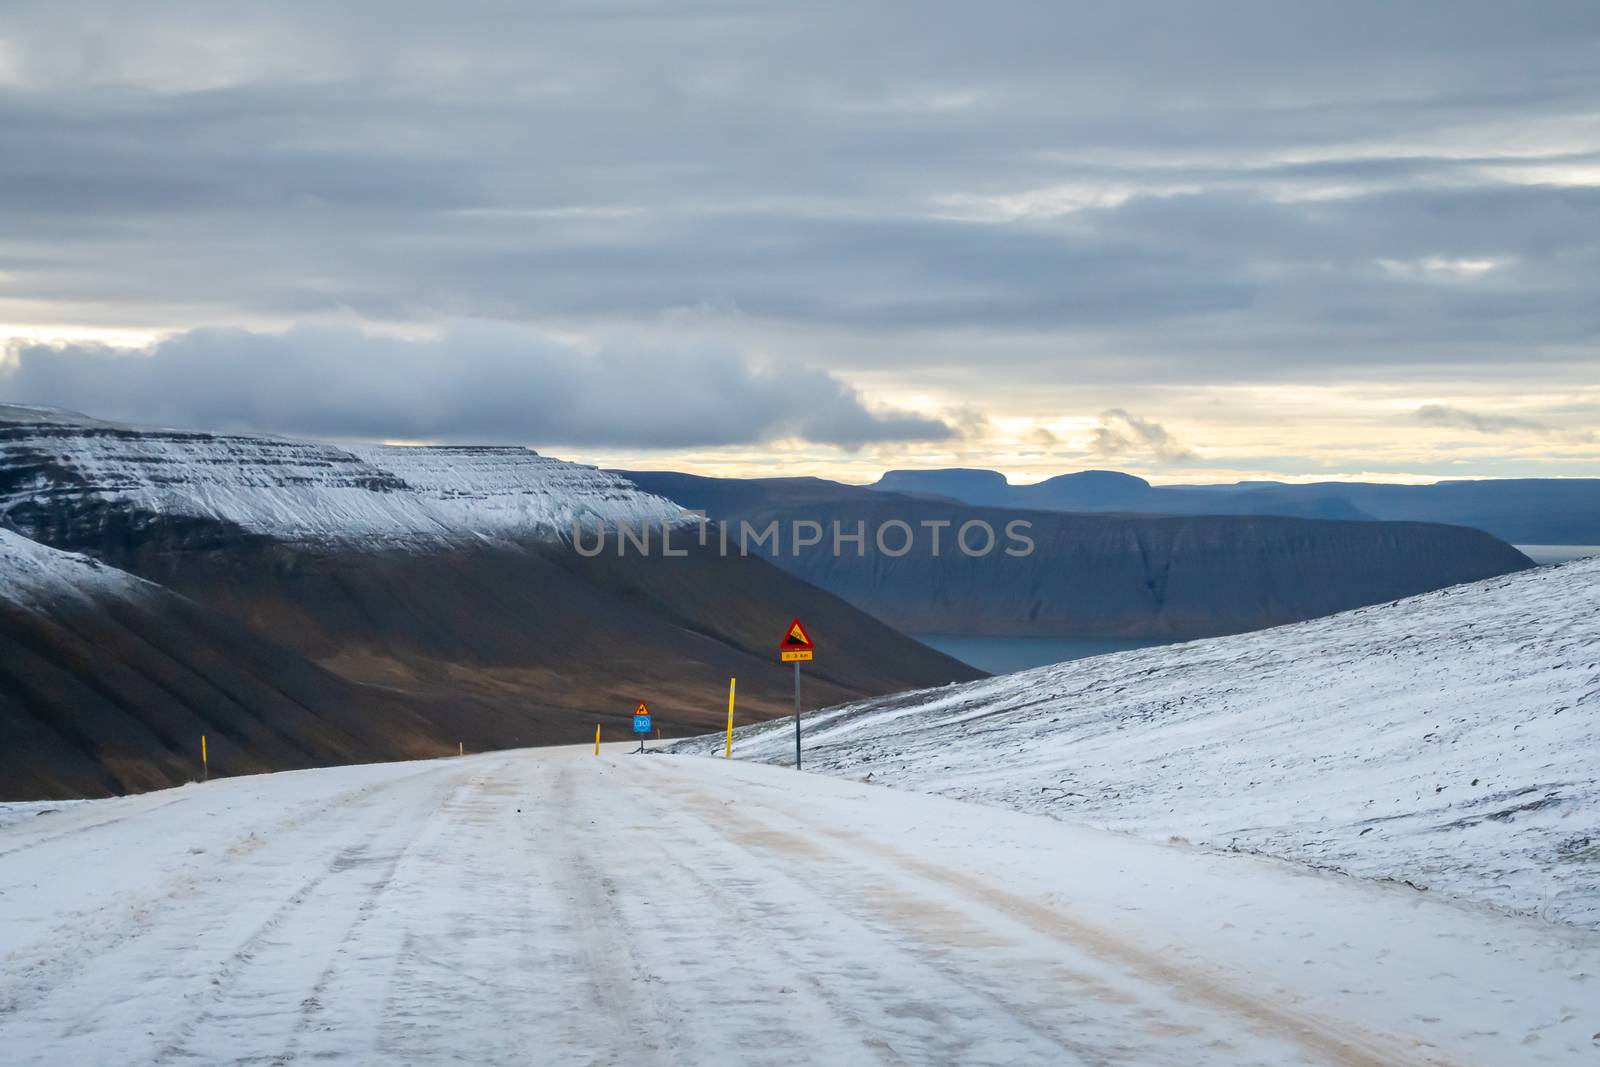 West fjords of Iceland snow covered mountain pass steep decline down into fjord